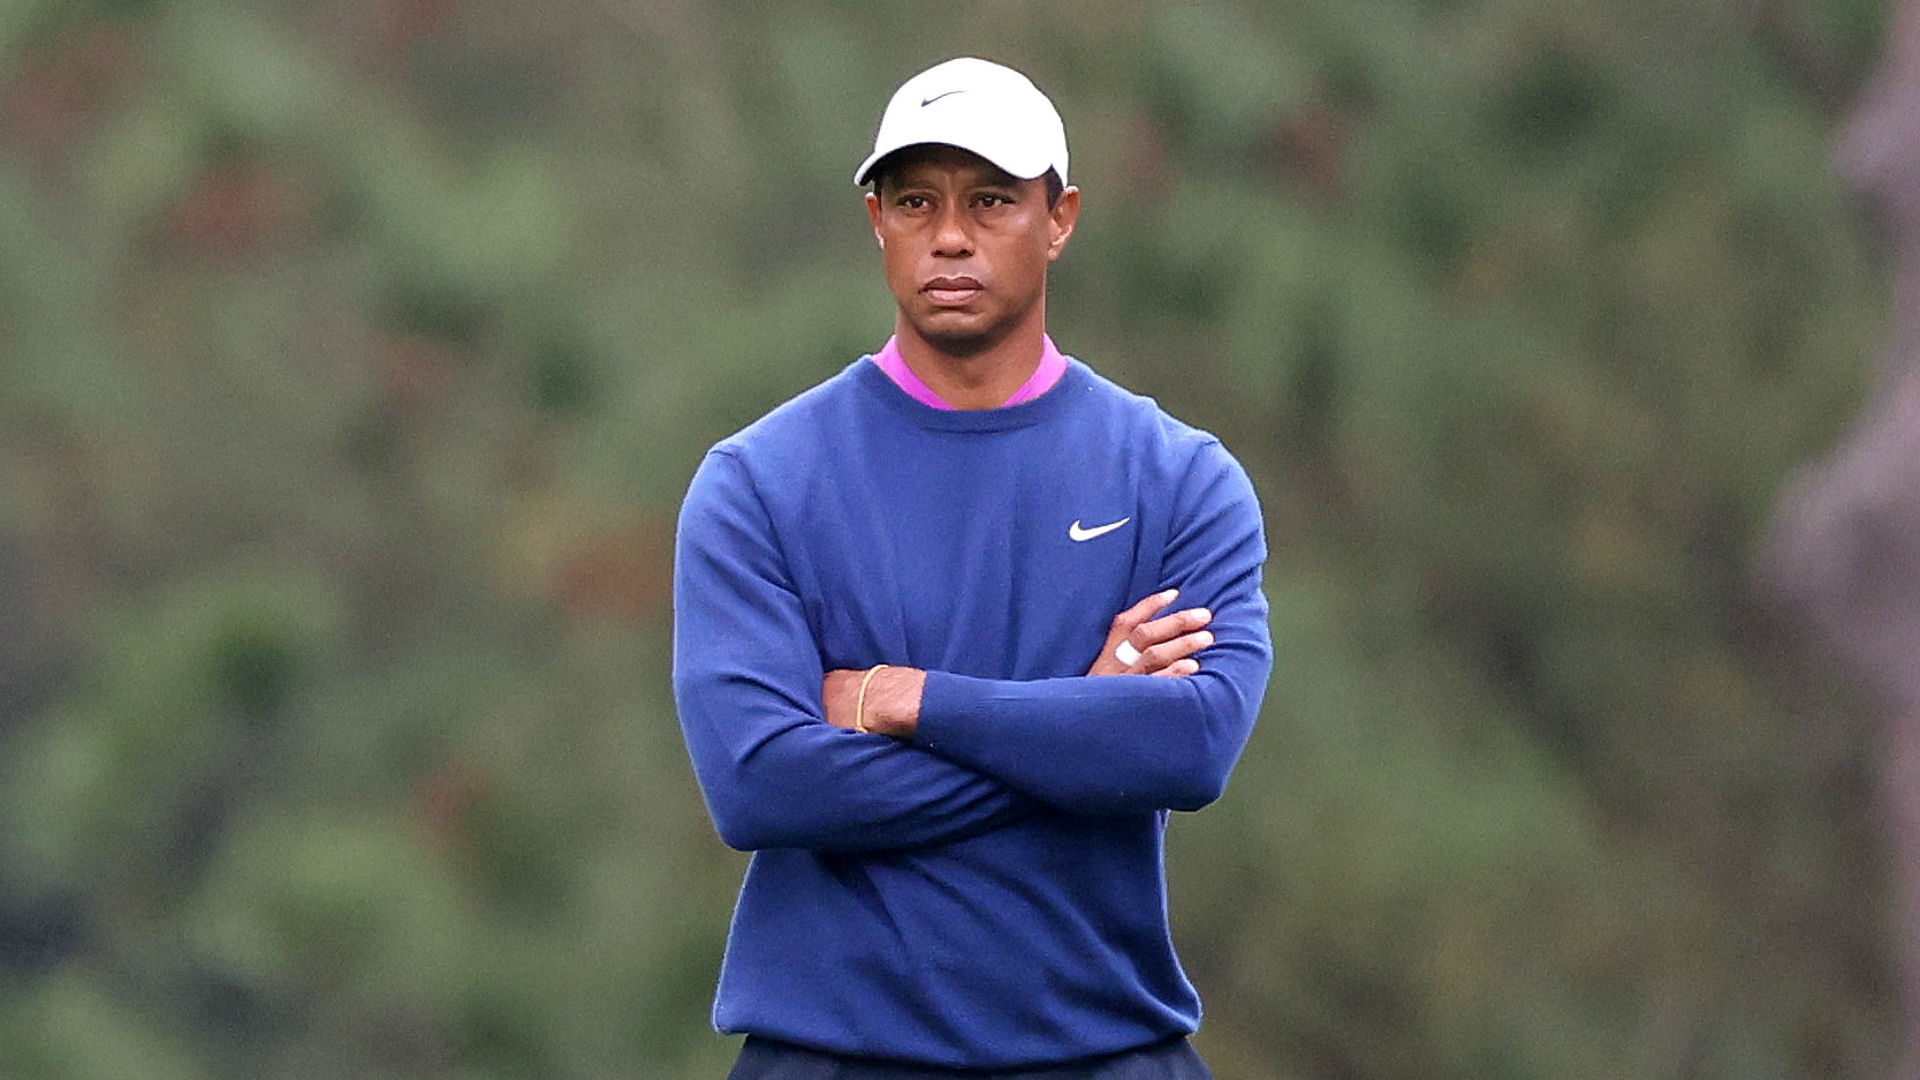 The Masters: Woods keeping emotions in check ahead of Sunday's finale